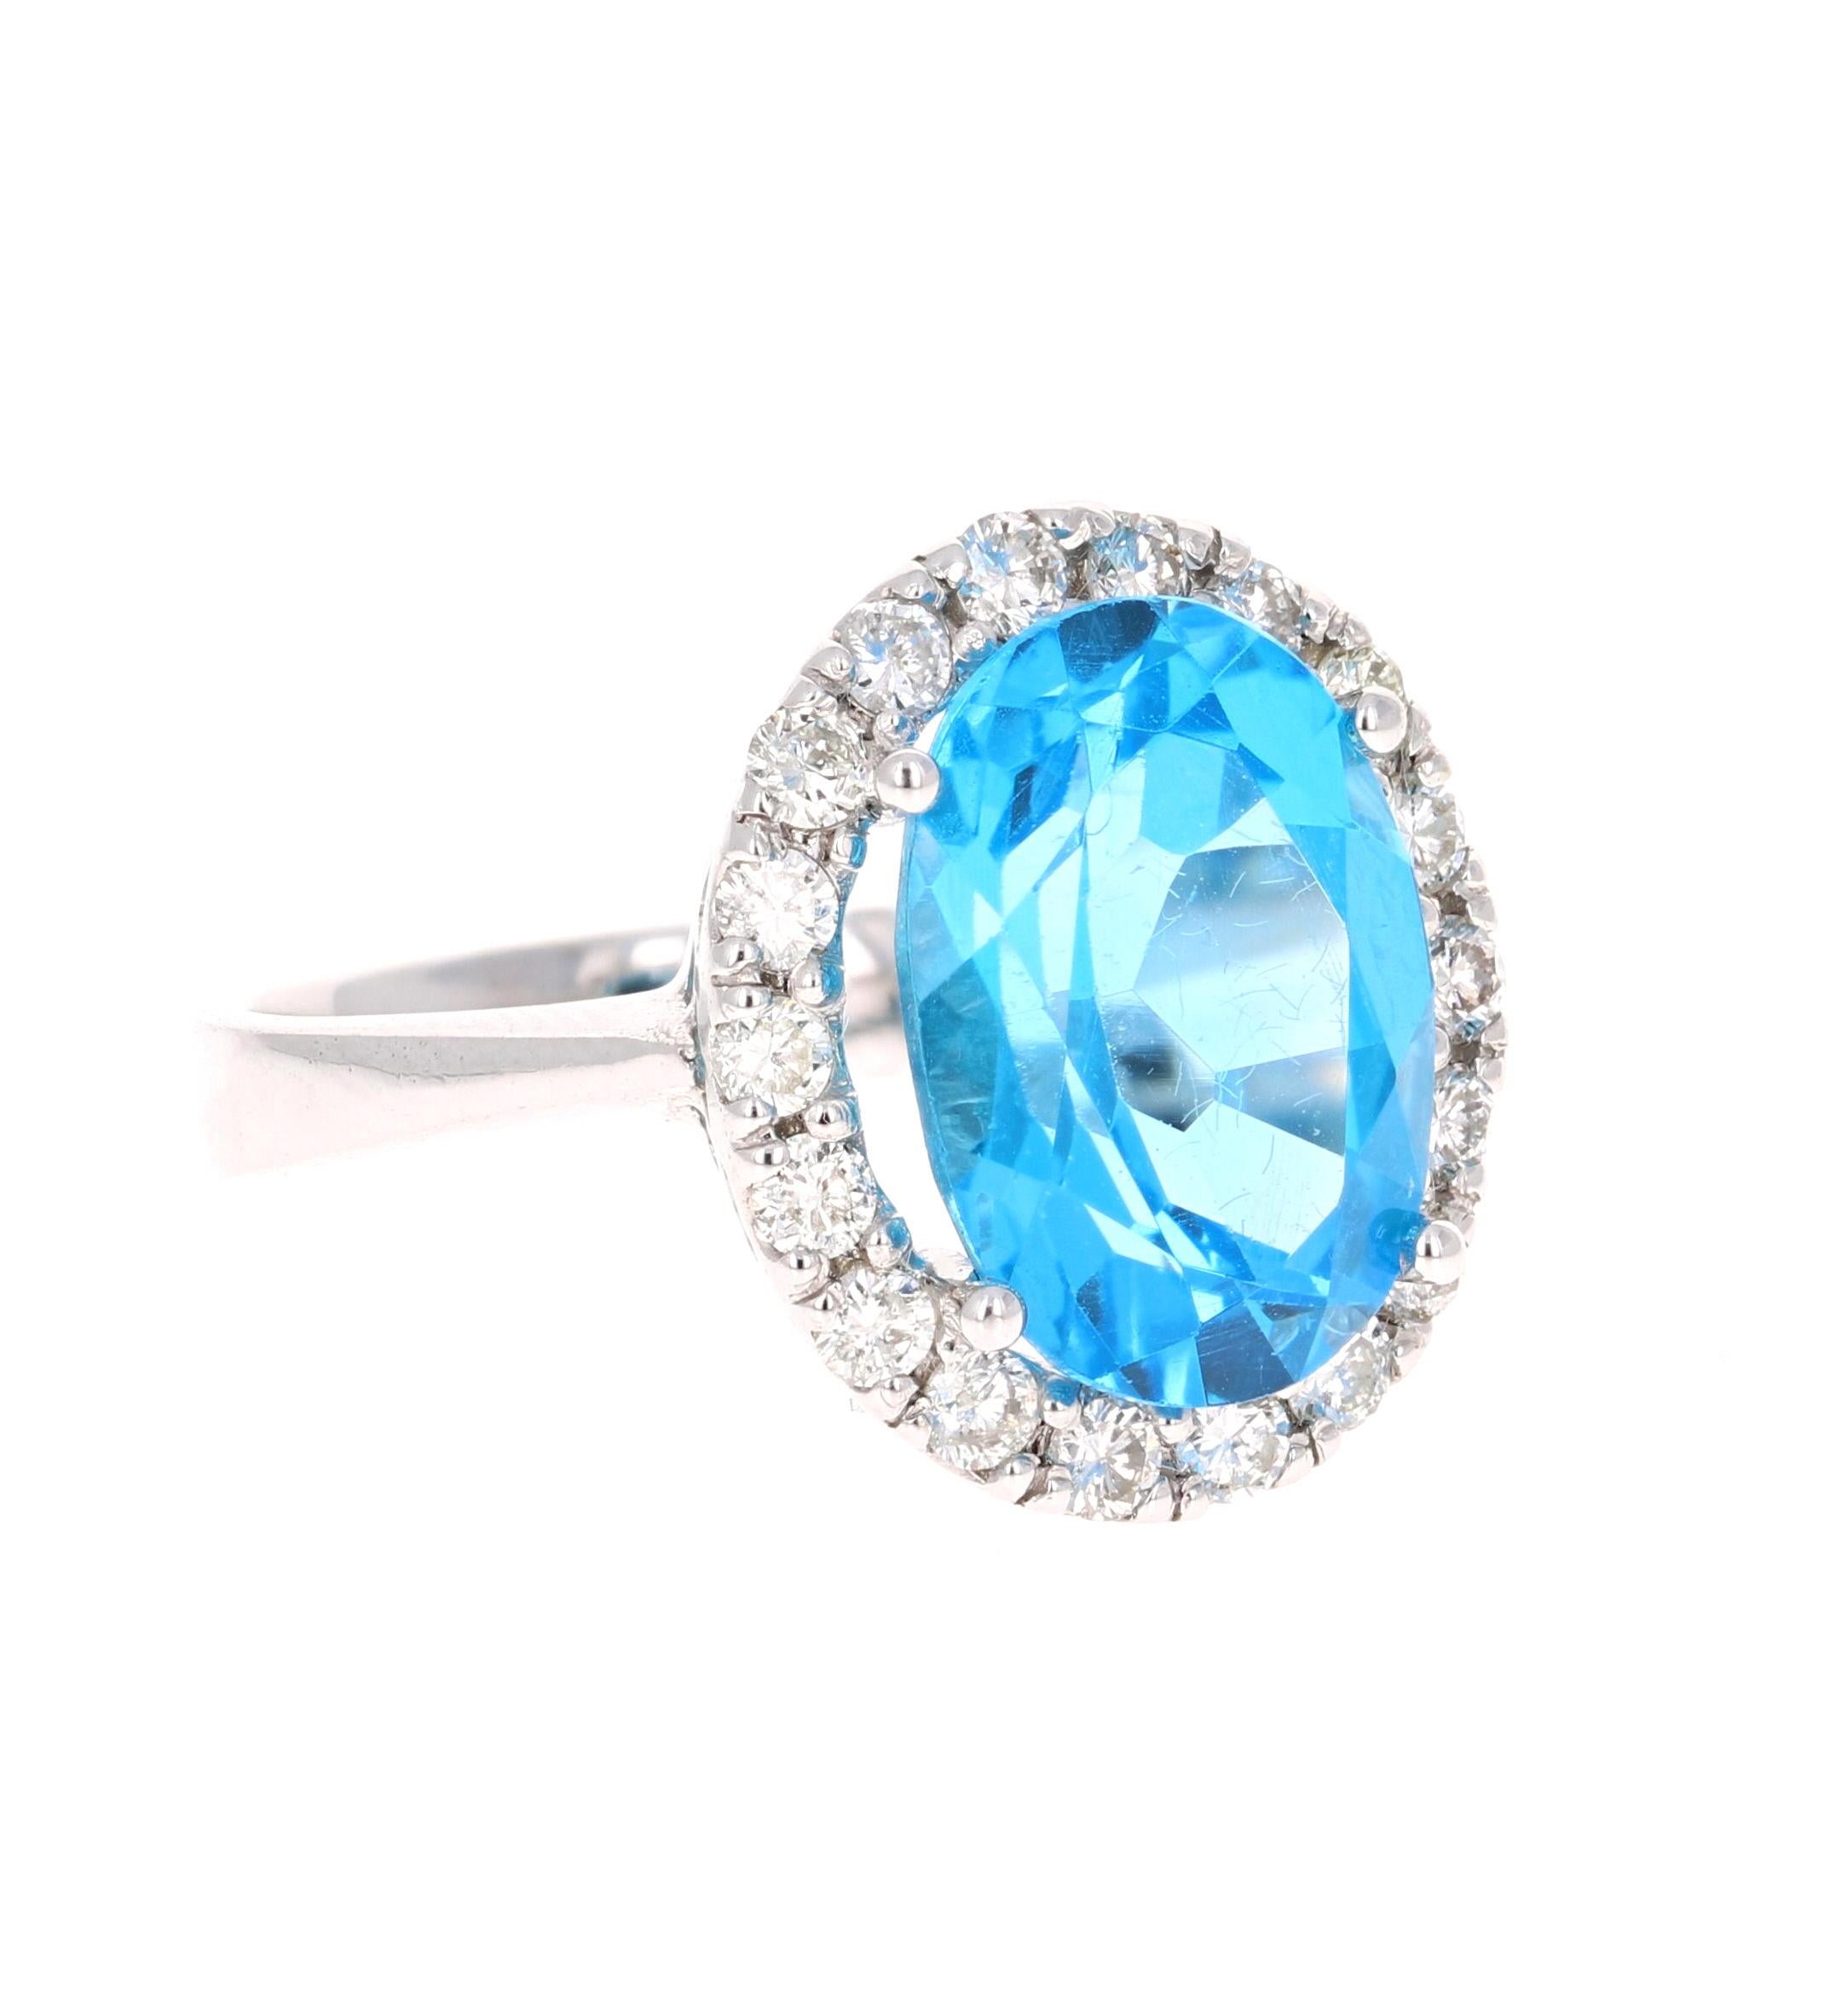 This beautiful Oval Cut Blue Topaz and Diamond ring has a stunning 7.11 Carat Blue Topaz and its surrounded by 18 Round Cut Diamonds that weigh 0.61 Carats. The total carat weight of the ring is 7.72 Carats. 
The setting is crafted in 14K White Gold